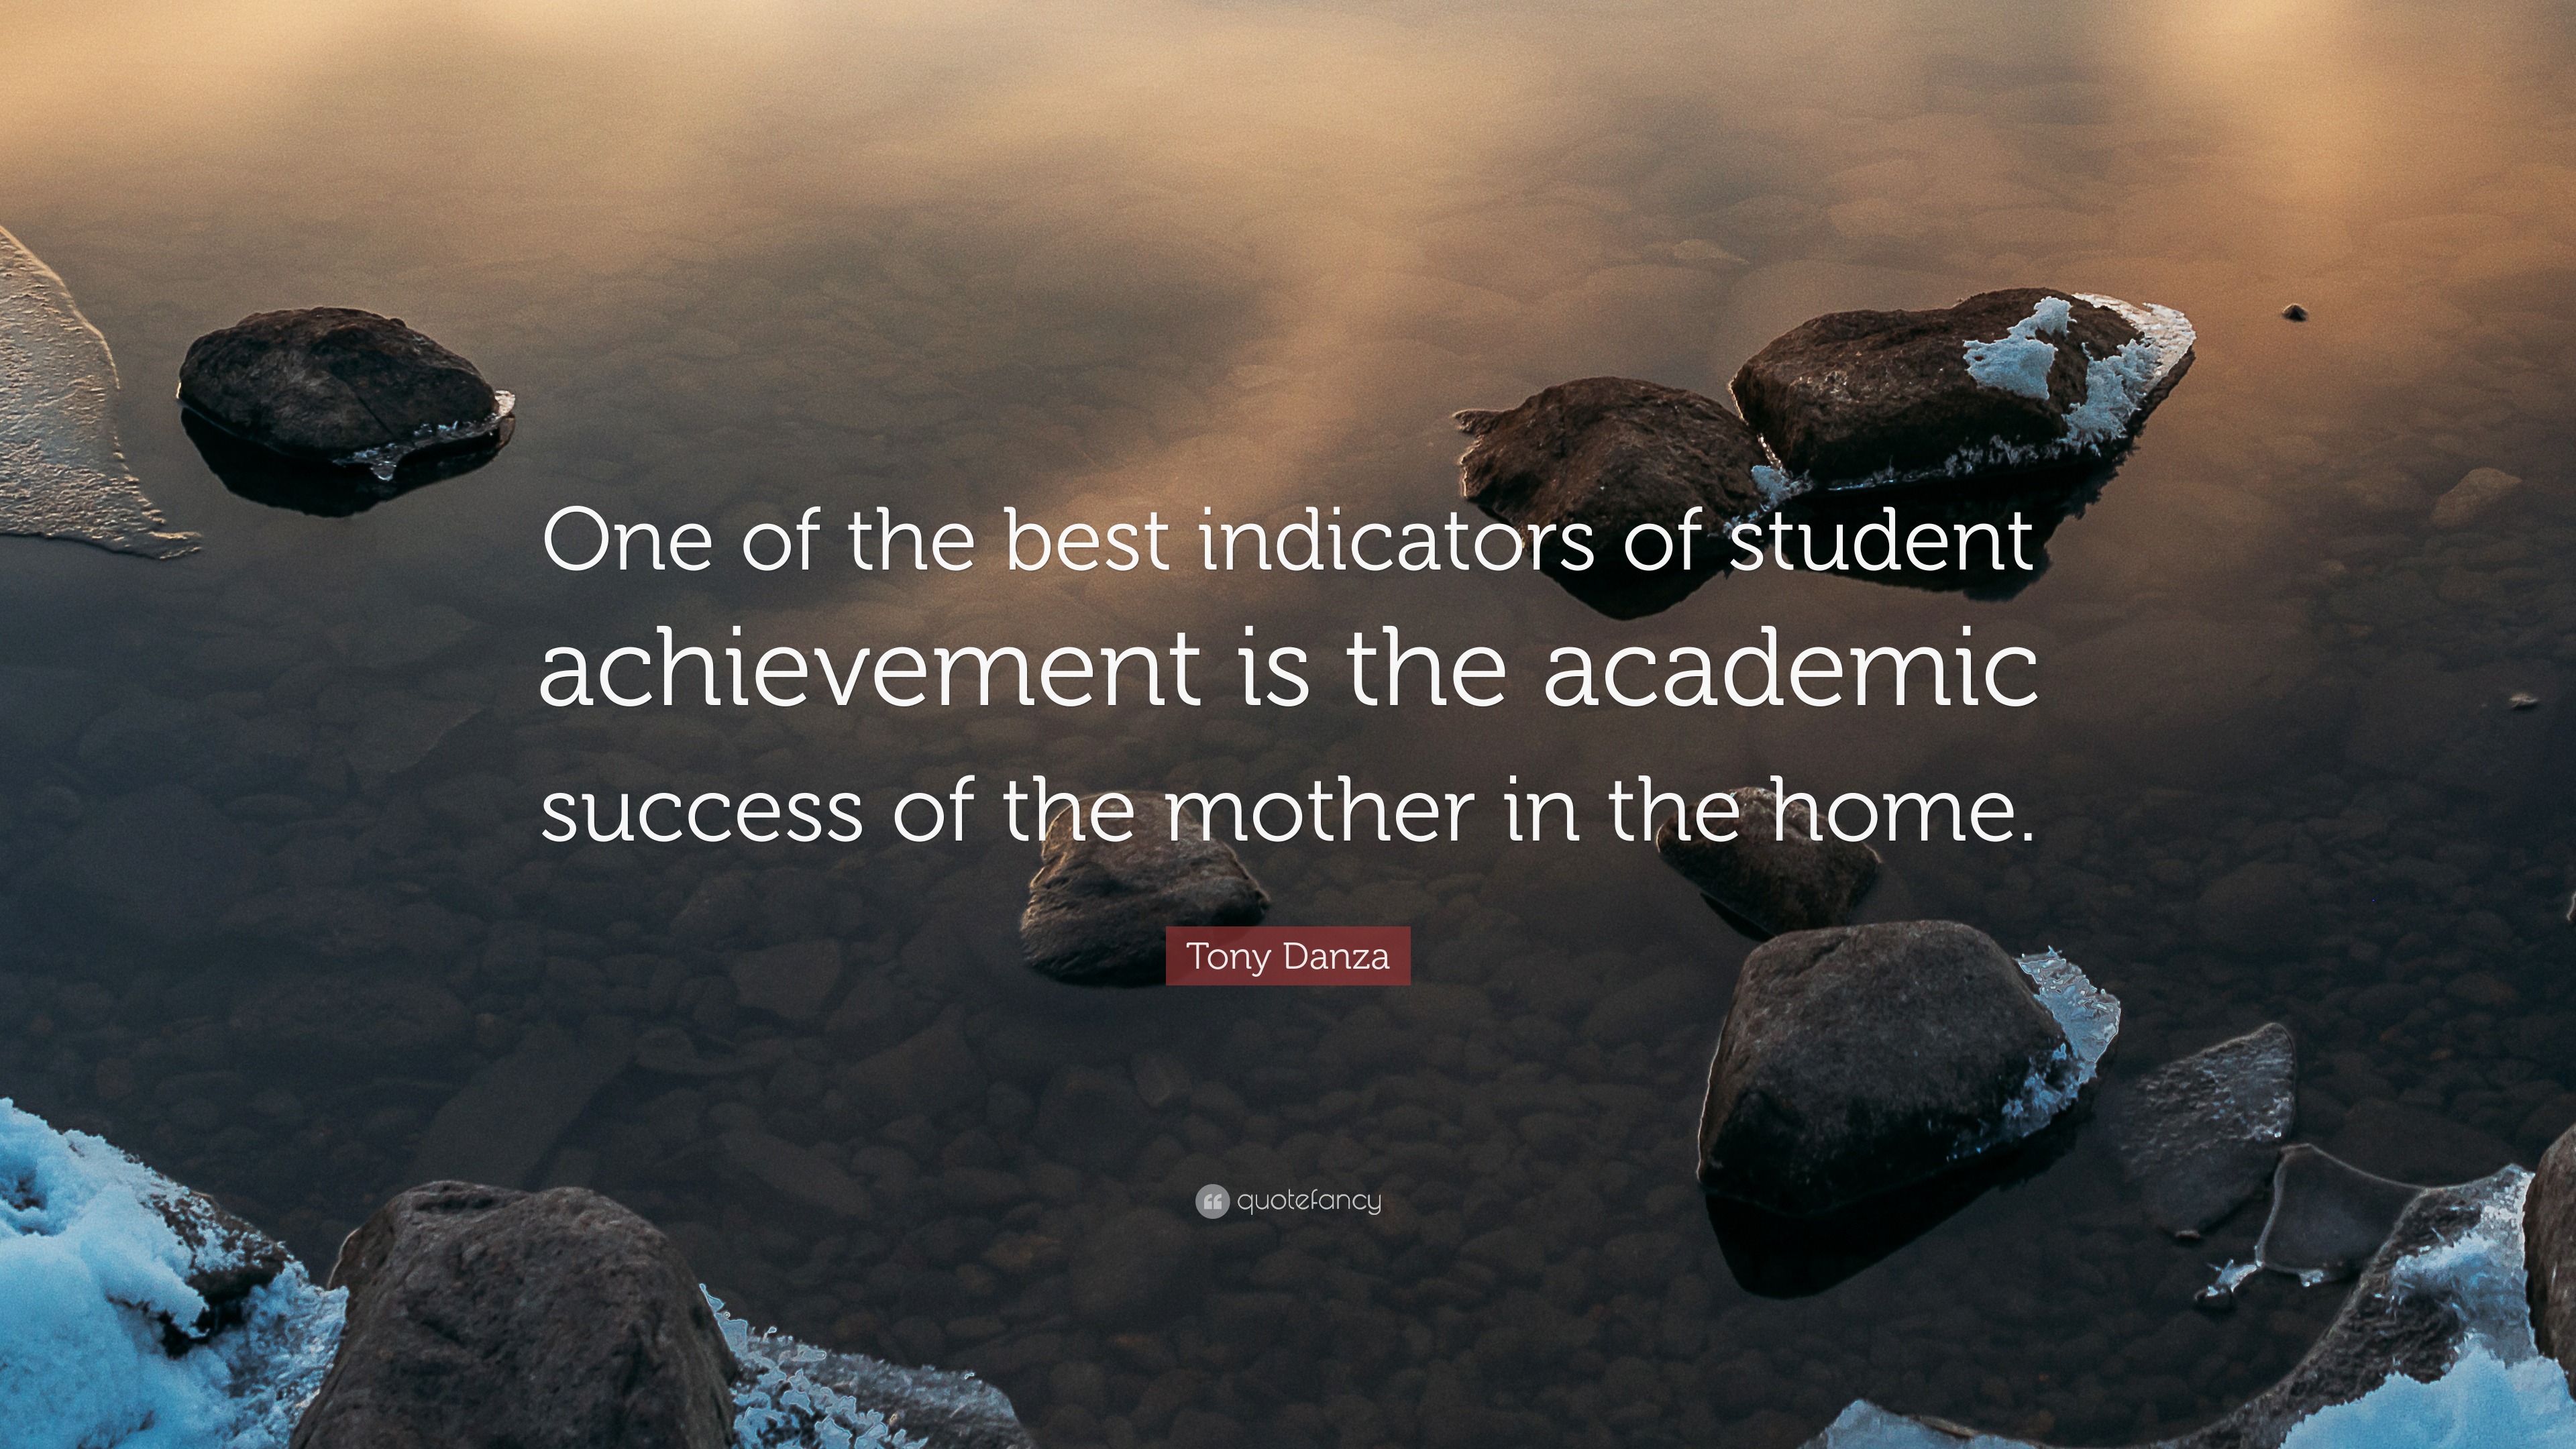 Tony Danza Quote: “One of the best indicators of student achievement is